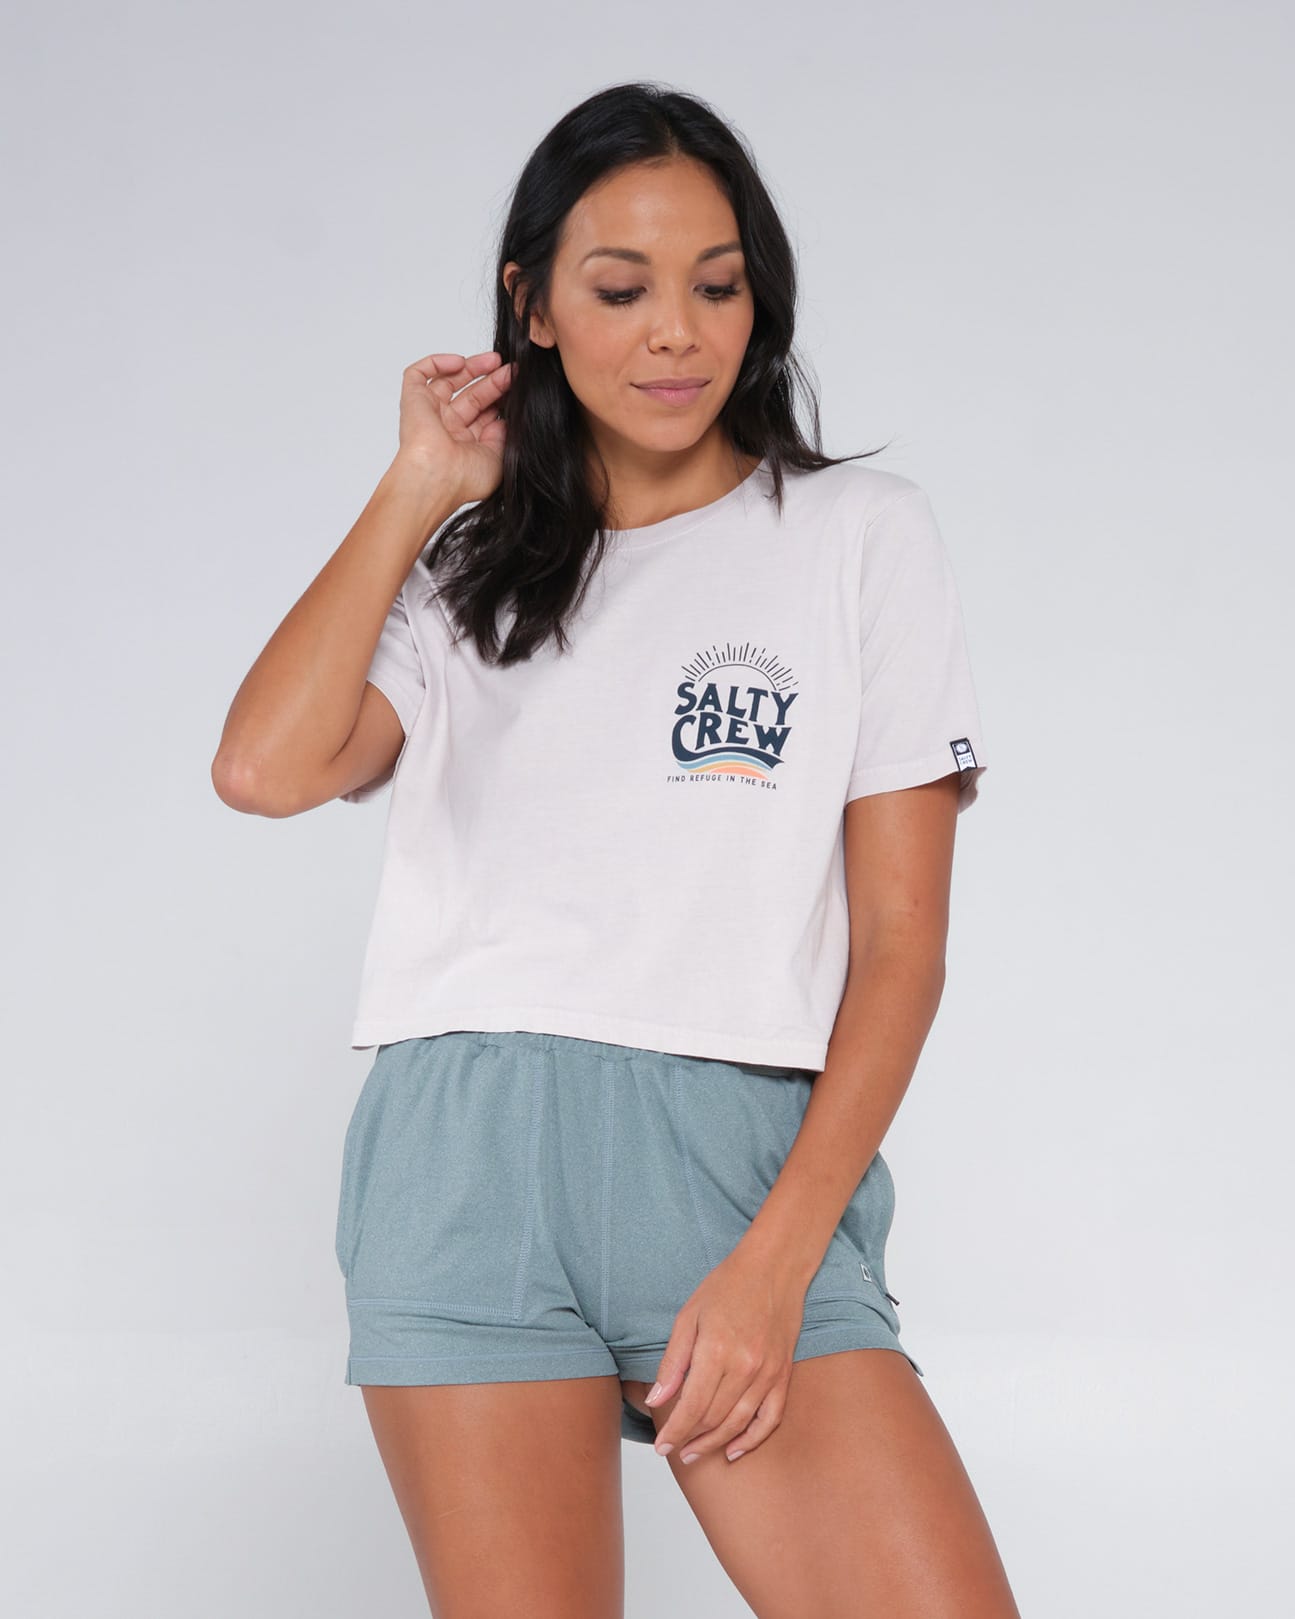 Salty crew T-SHIRTS S/S THE WAVE CROP TEE - Natural in Natural